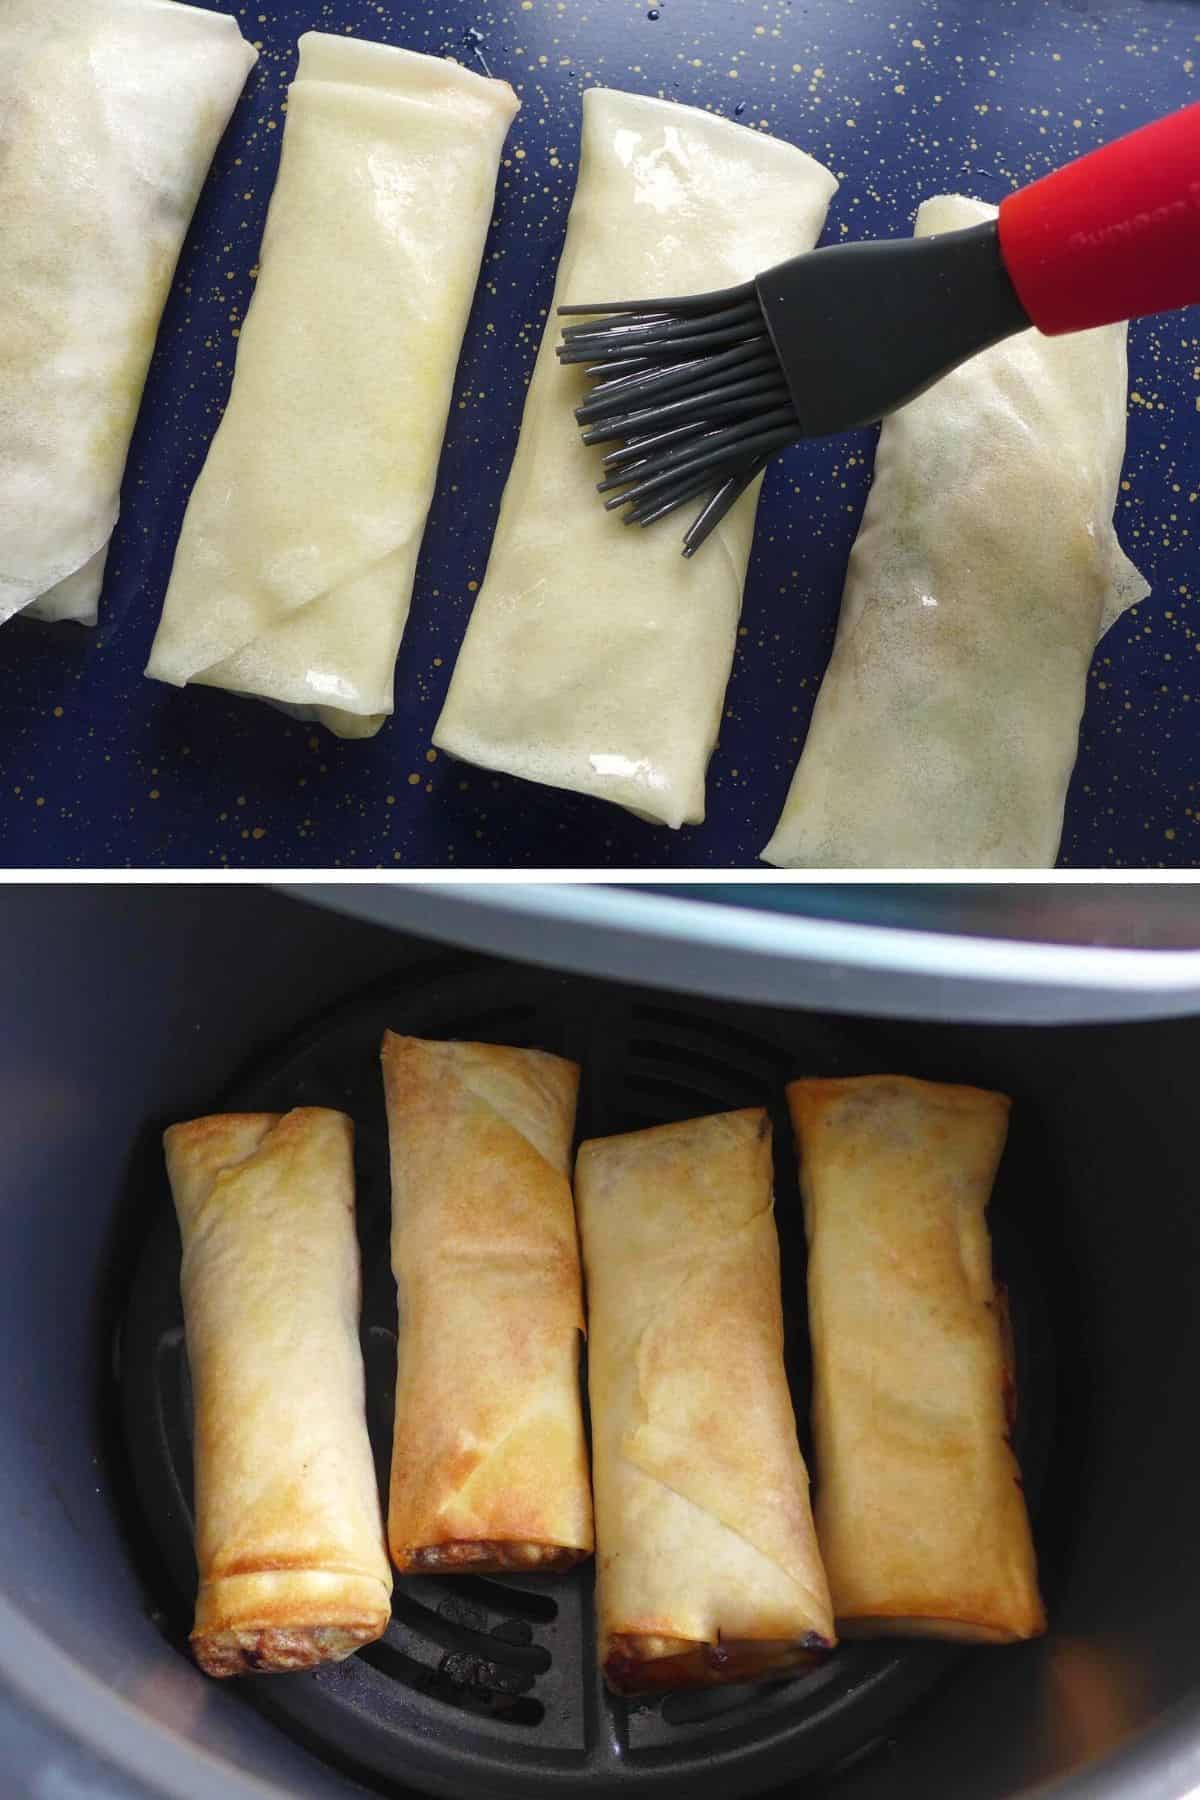 brush oil over uncooked spring rolls and cook them in an air fryer